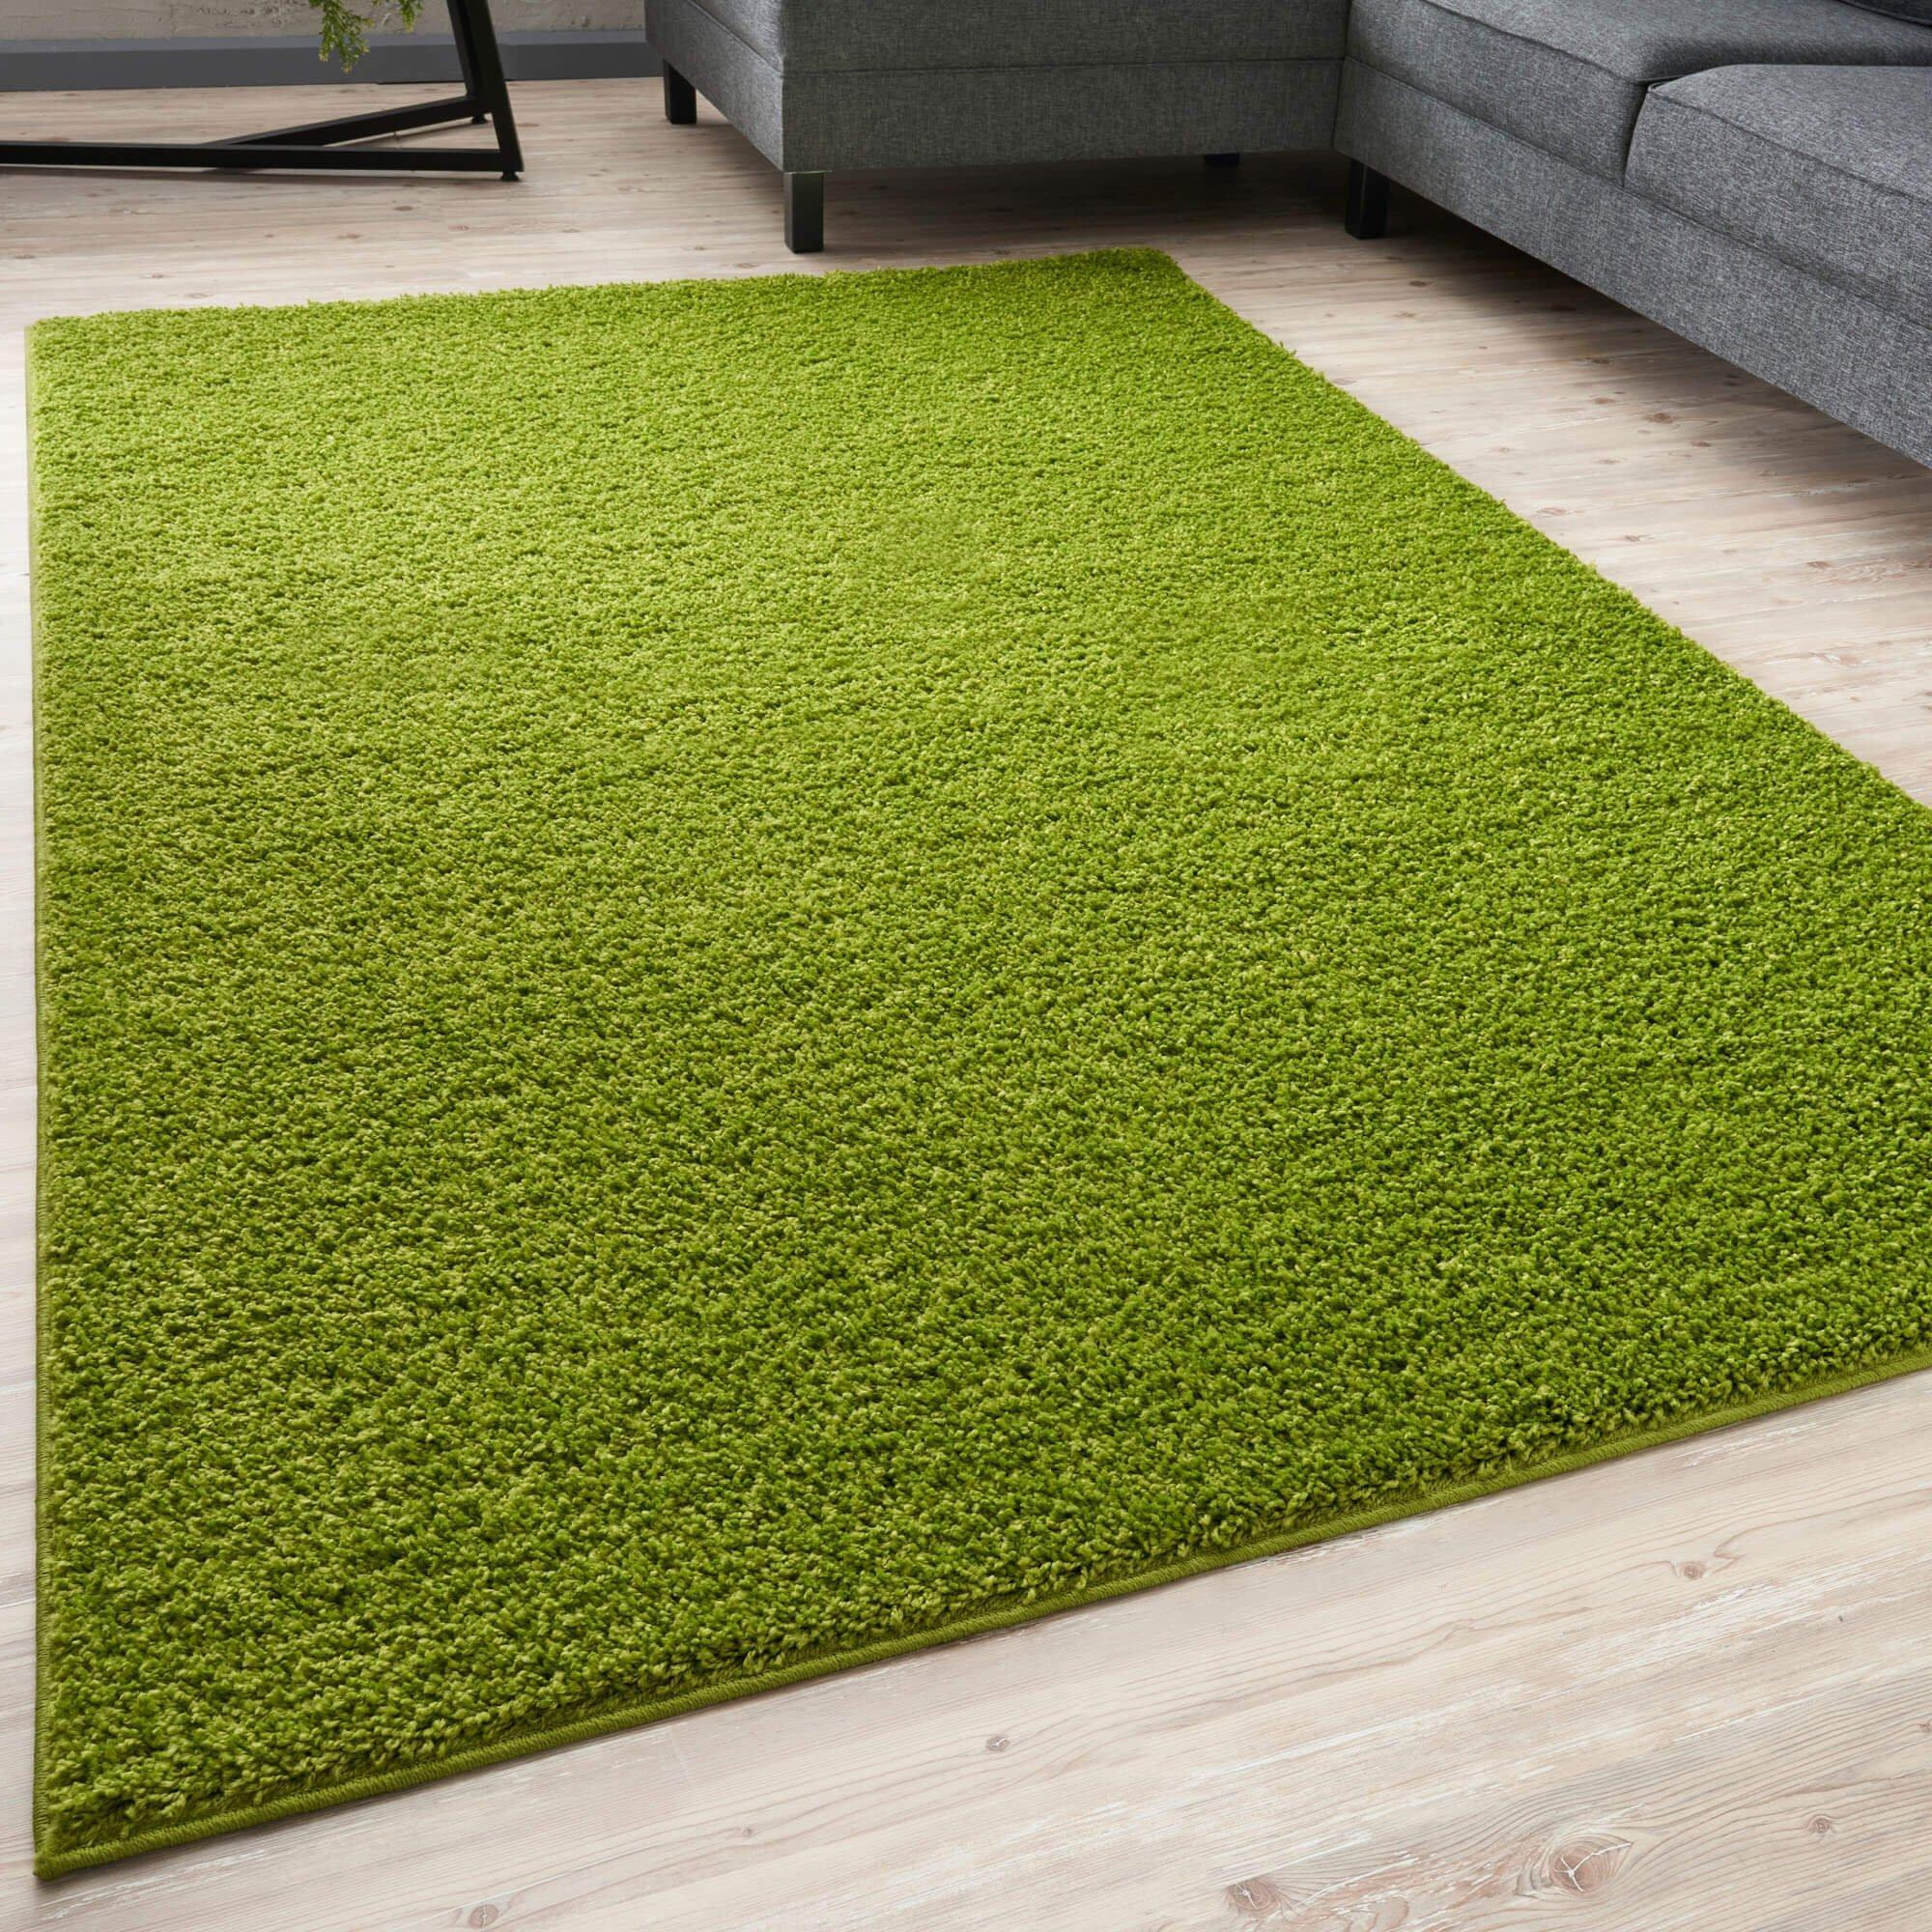 Myshaggy Collection Rugs Solid Design - Green - image 1